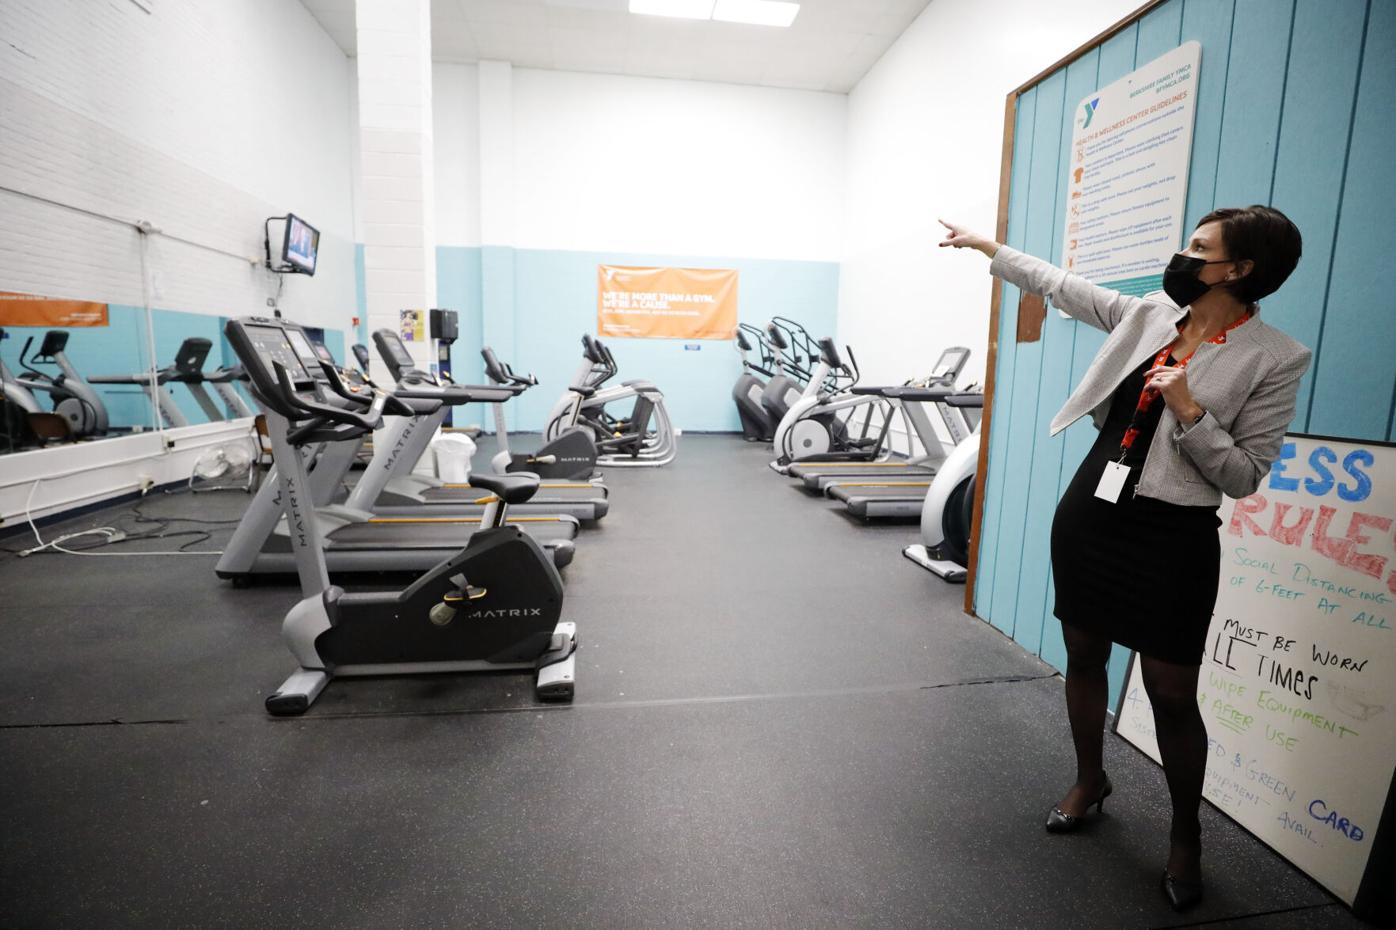 jessica rumlow pointing during fitness room tour